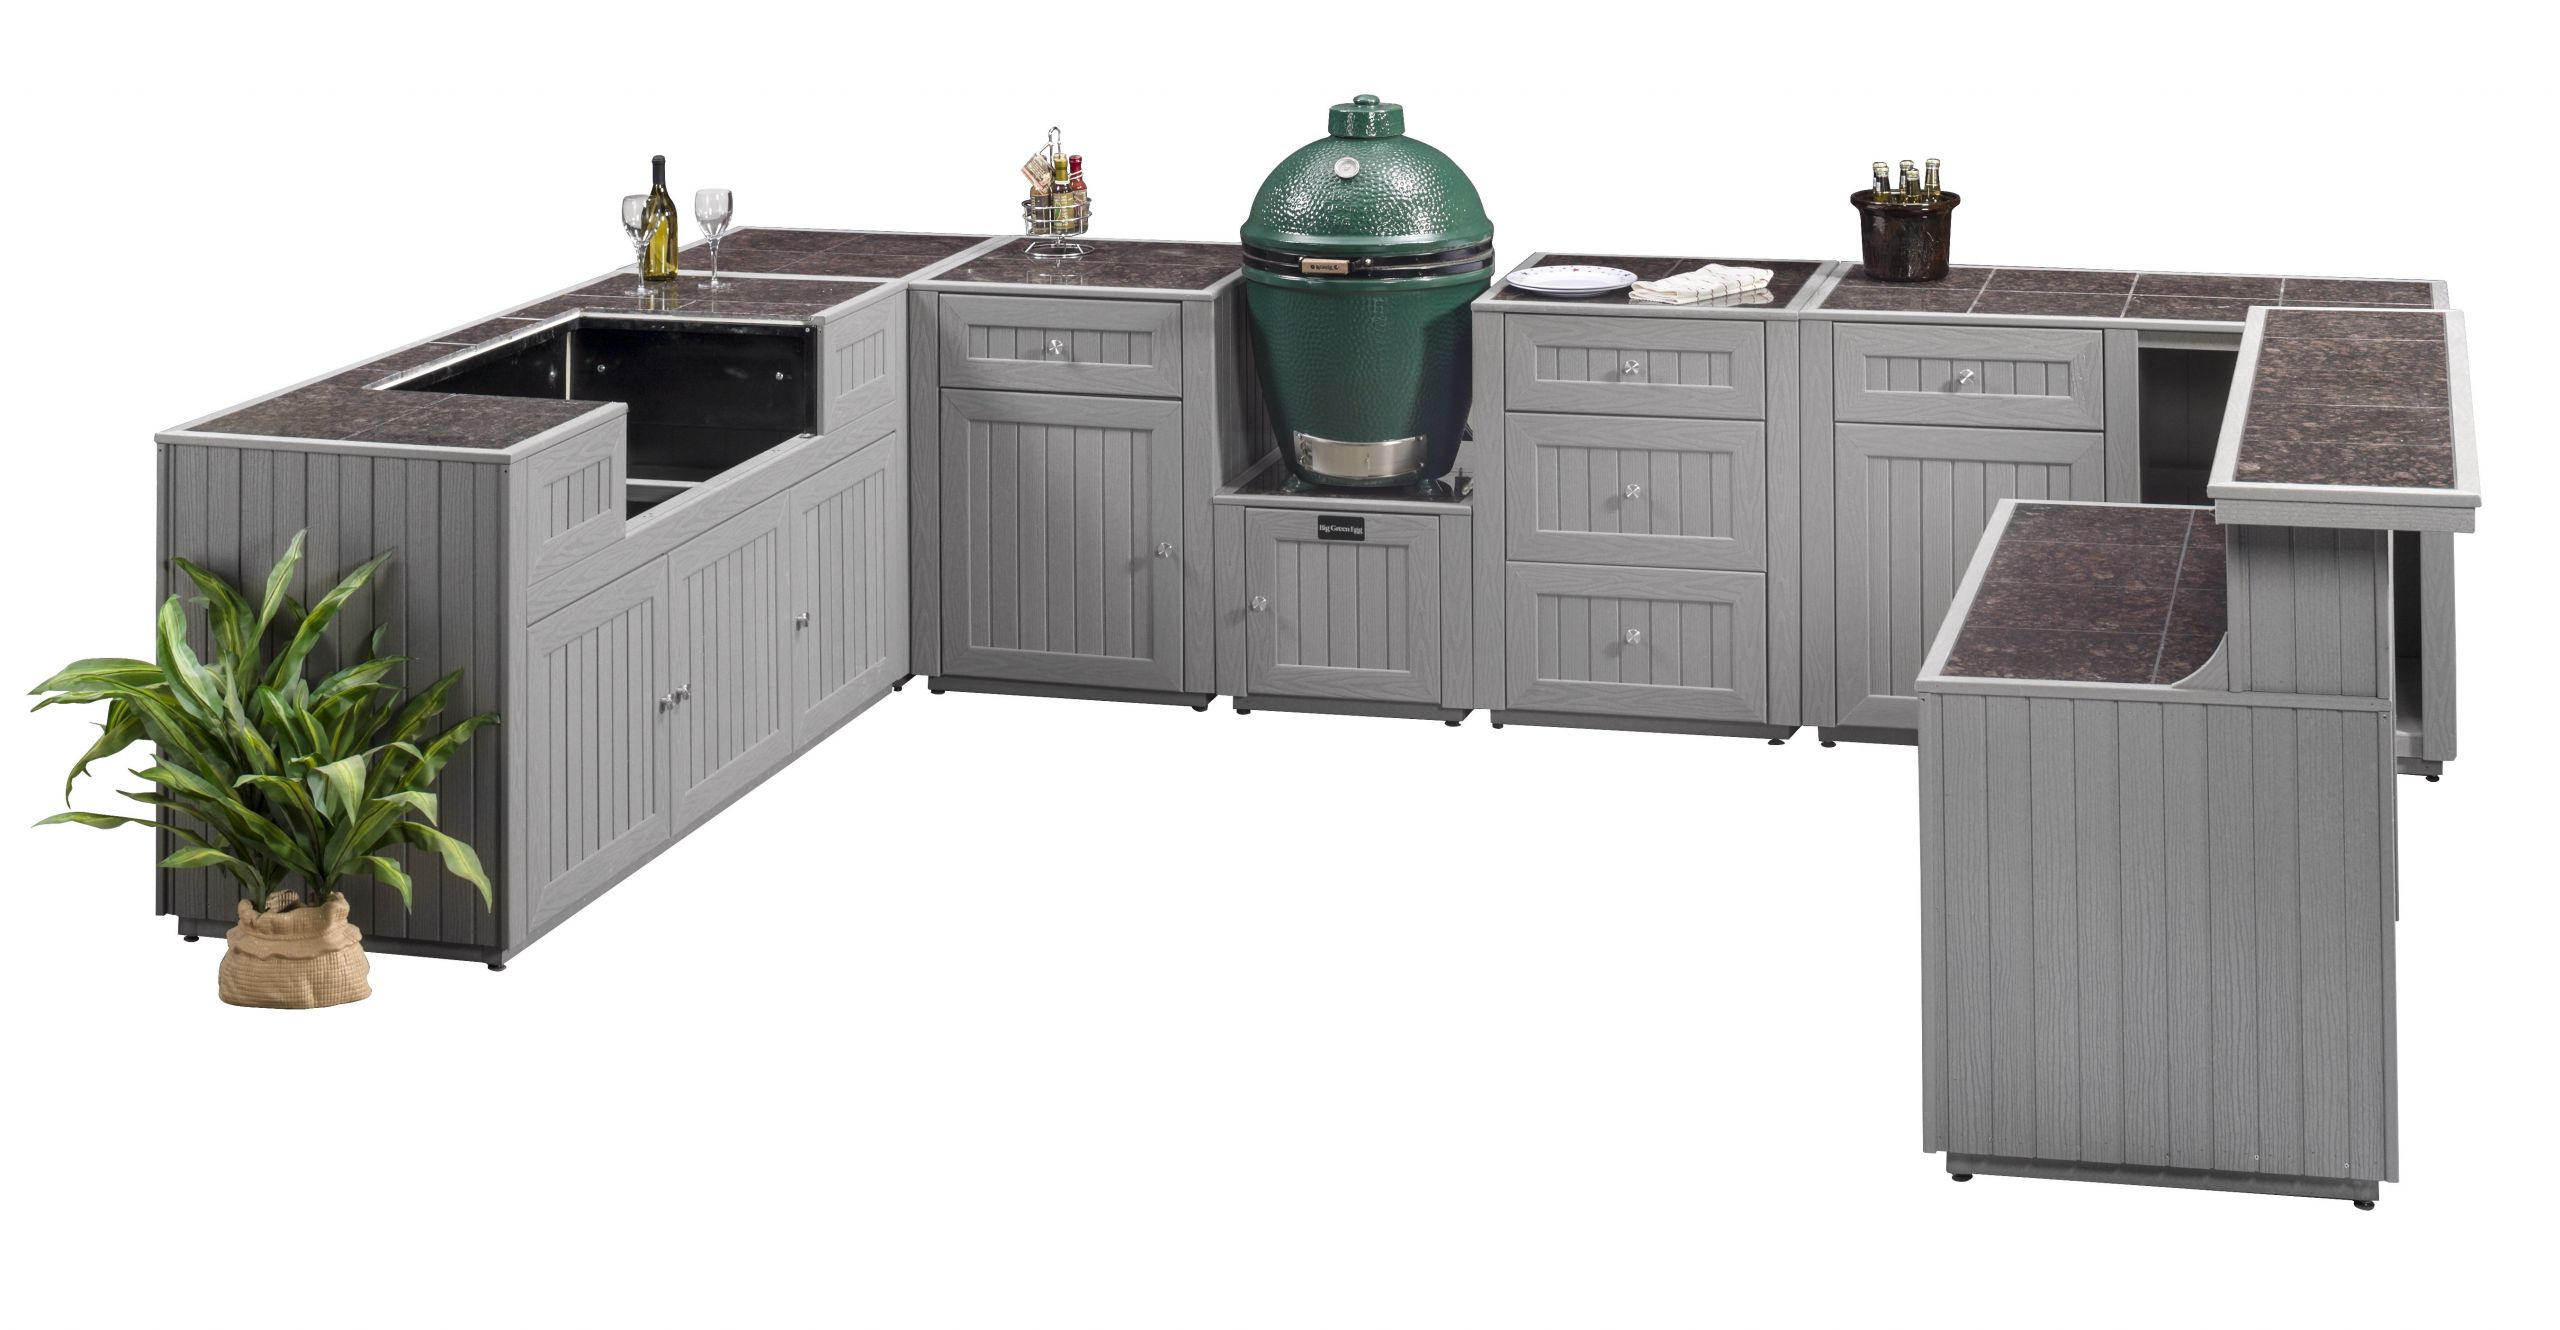 Prefab Outdoor Kitchen Island
 Kitchen Convert Your Backyard With Awesome Modular